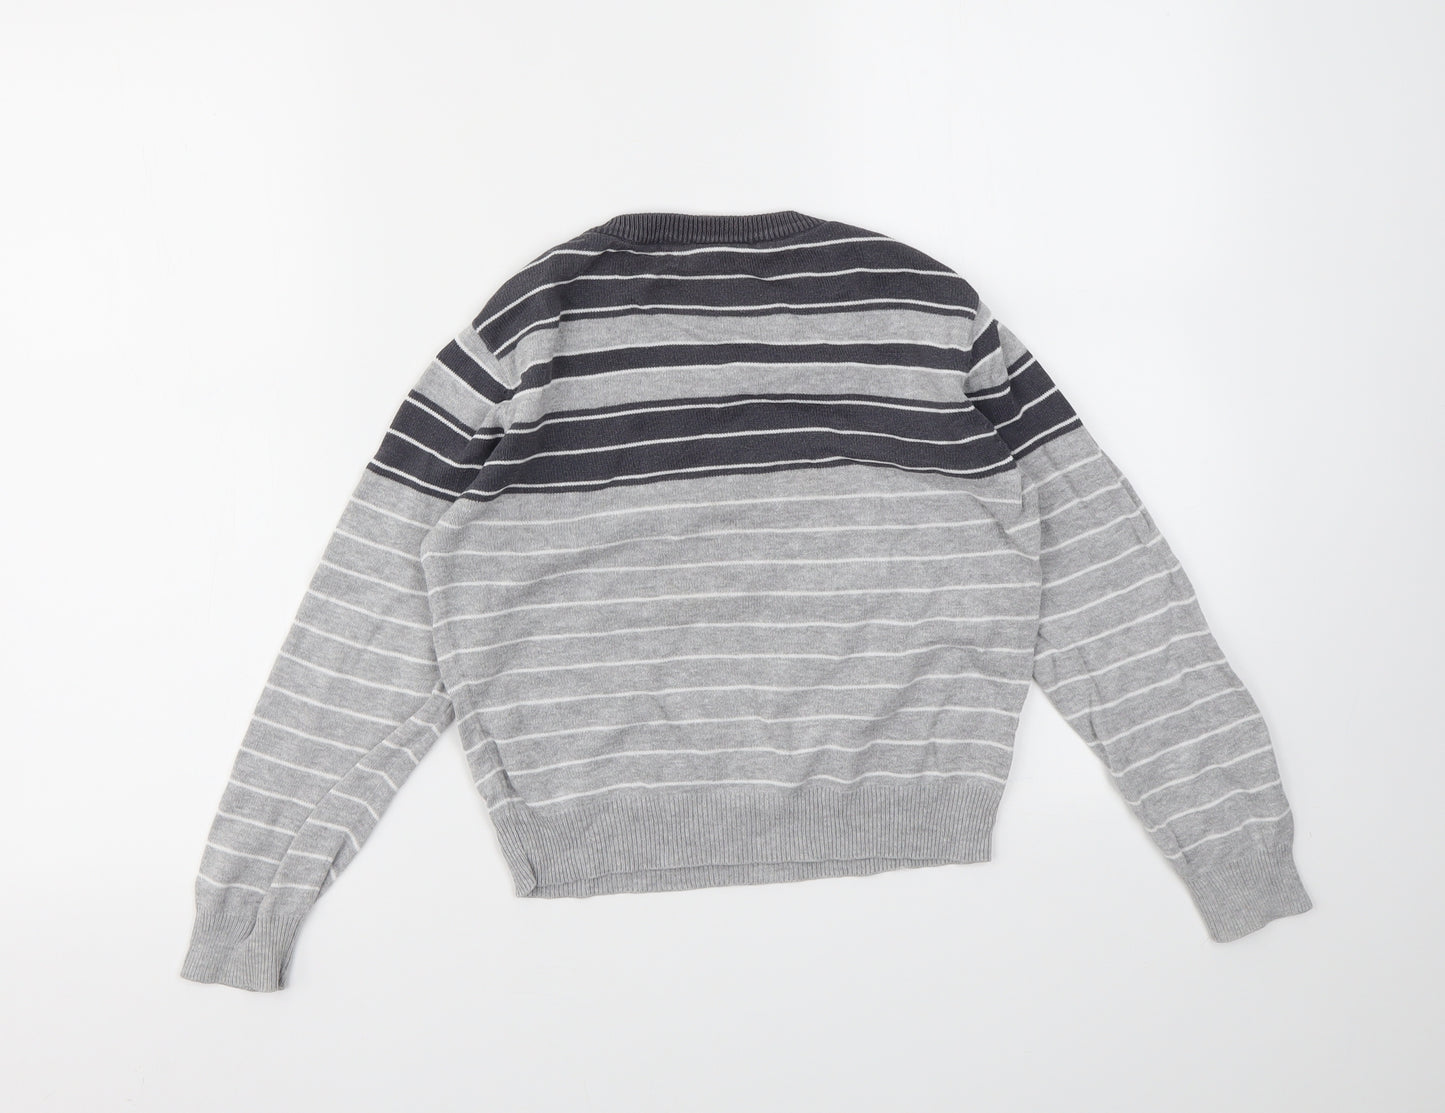 COOLCLUB  Boys Multicoloured Striped  Pullover Jumper Size 6-7 Years